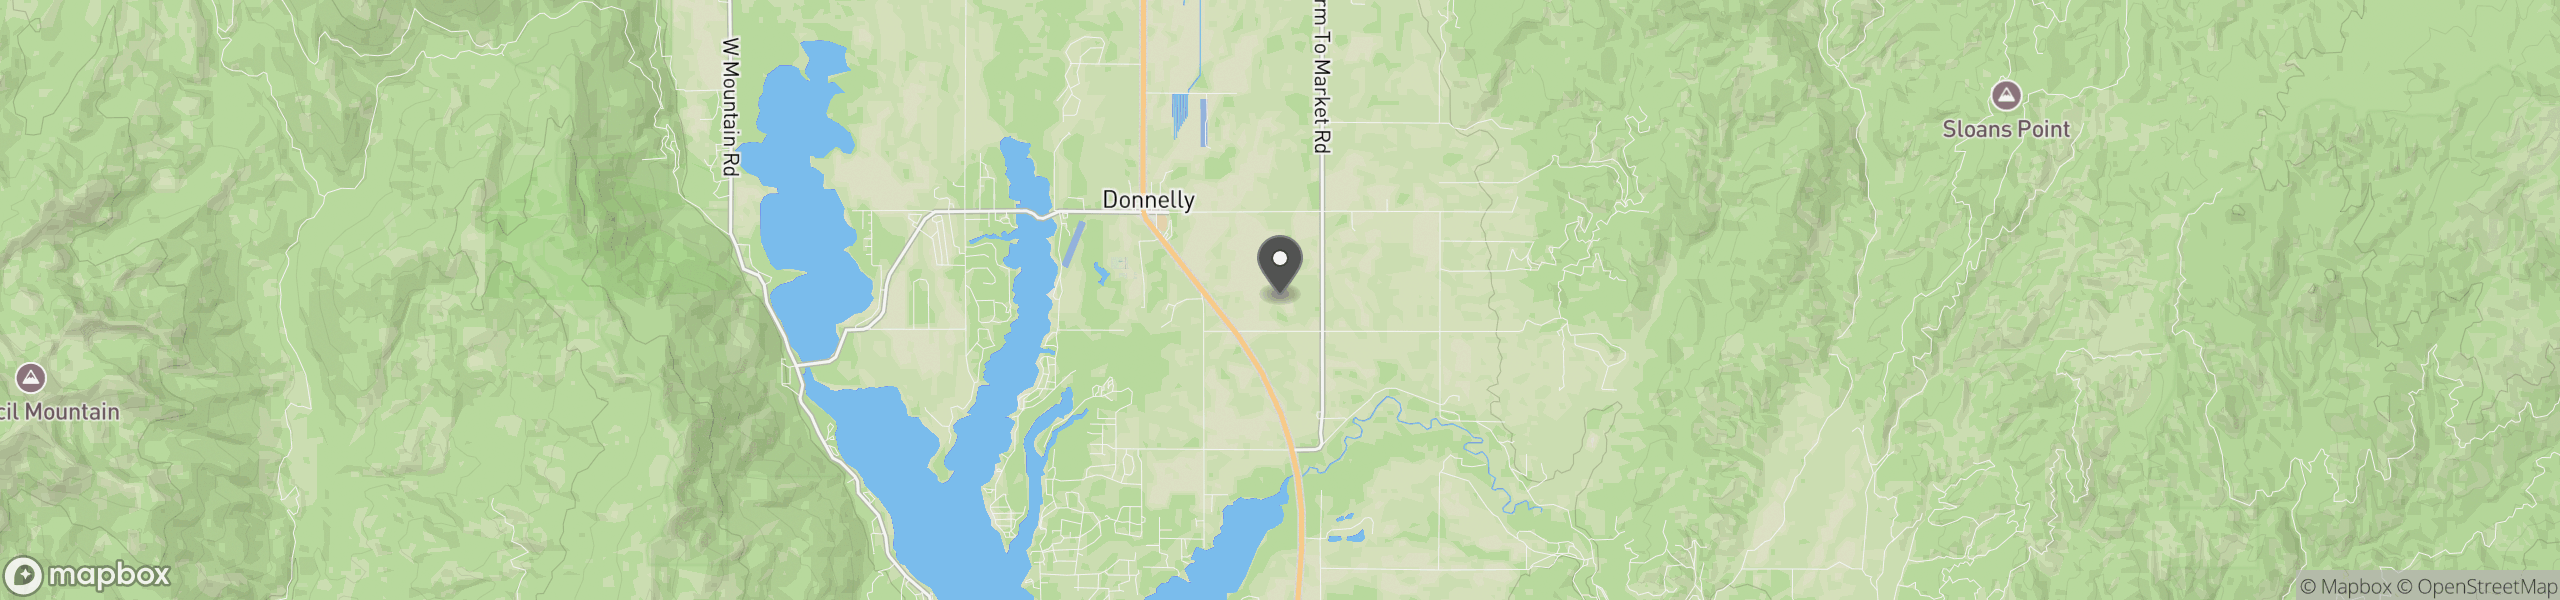 Donnelly, ID 83615